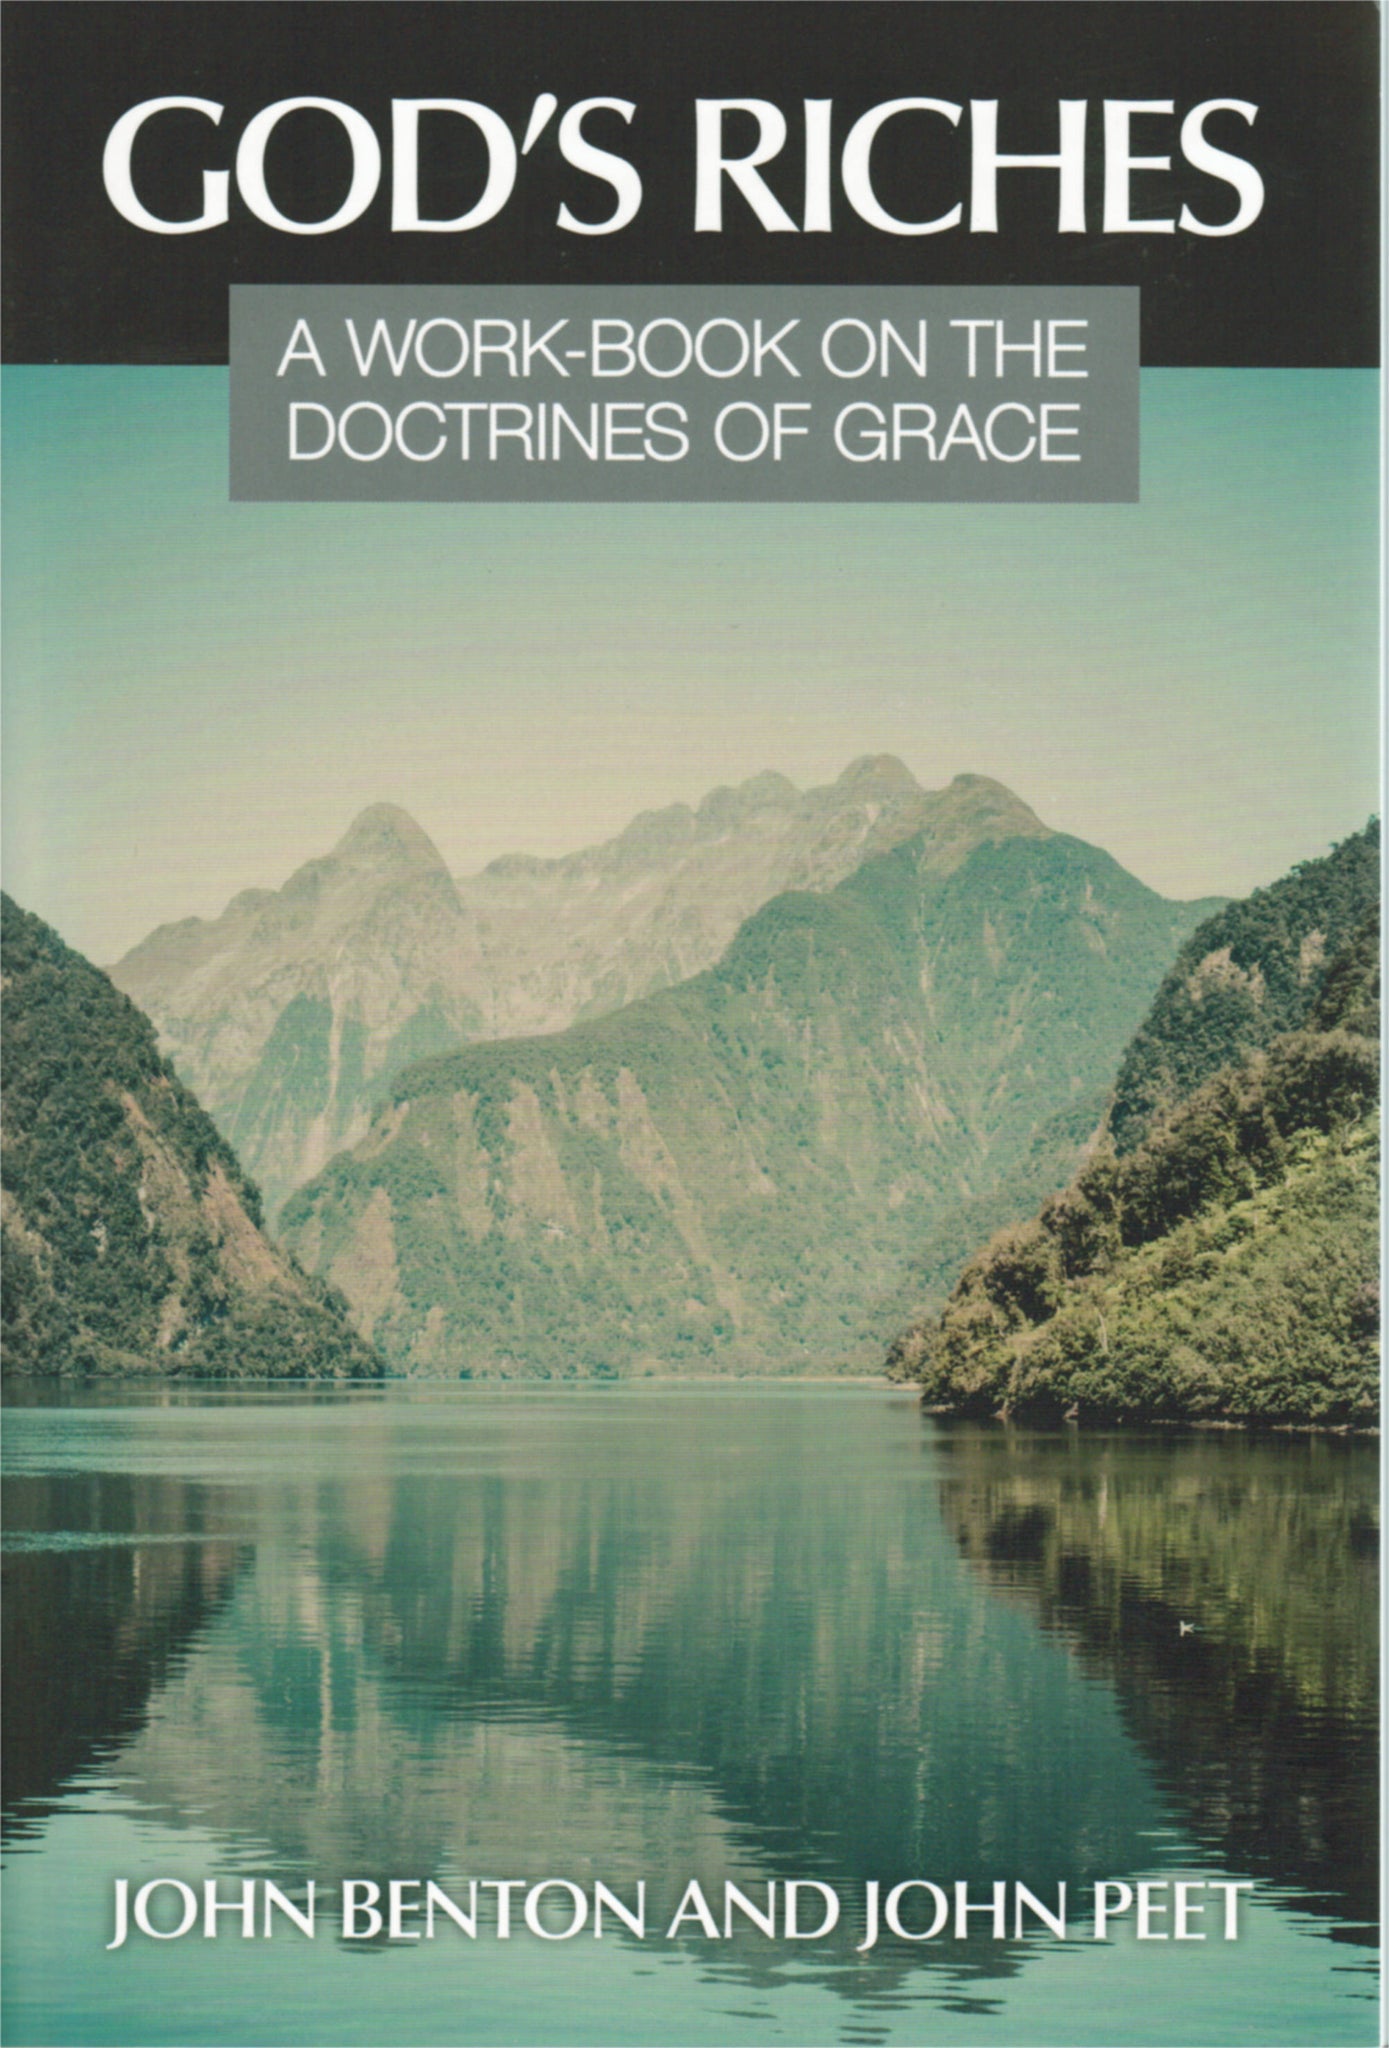 God's Riches: A Workbook on the Doctrines of Grace